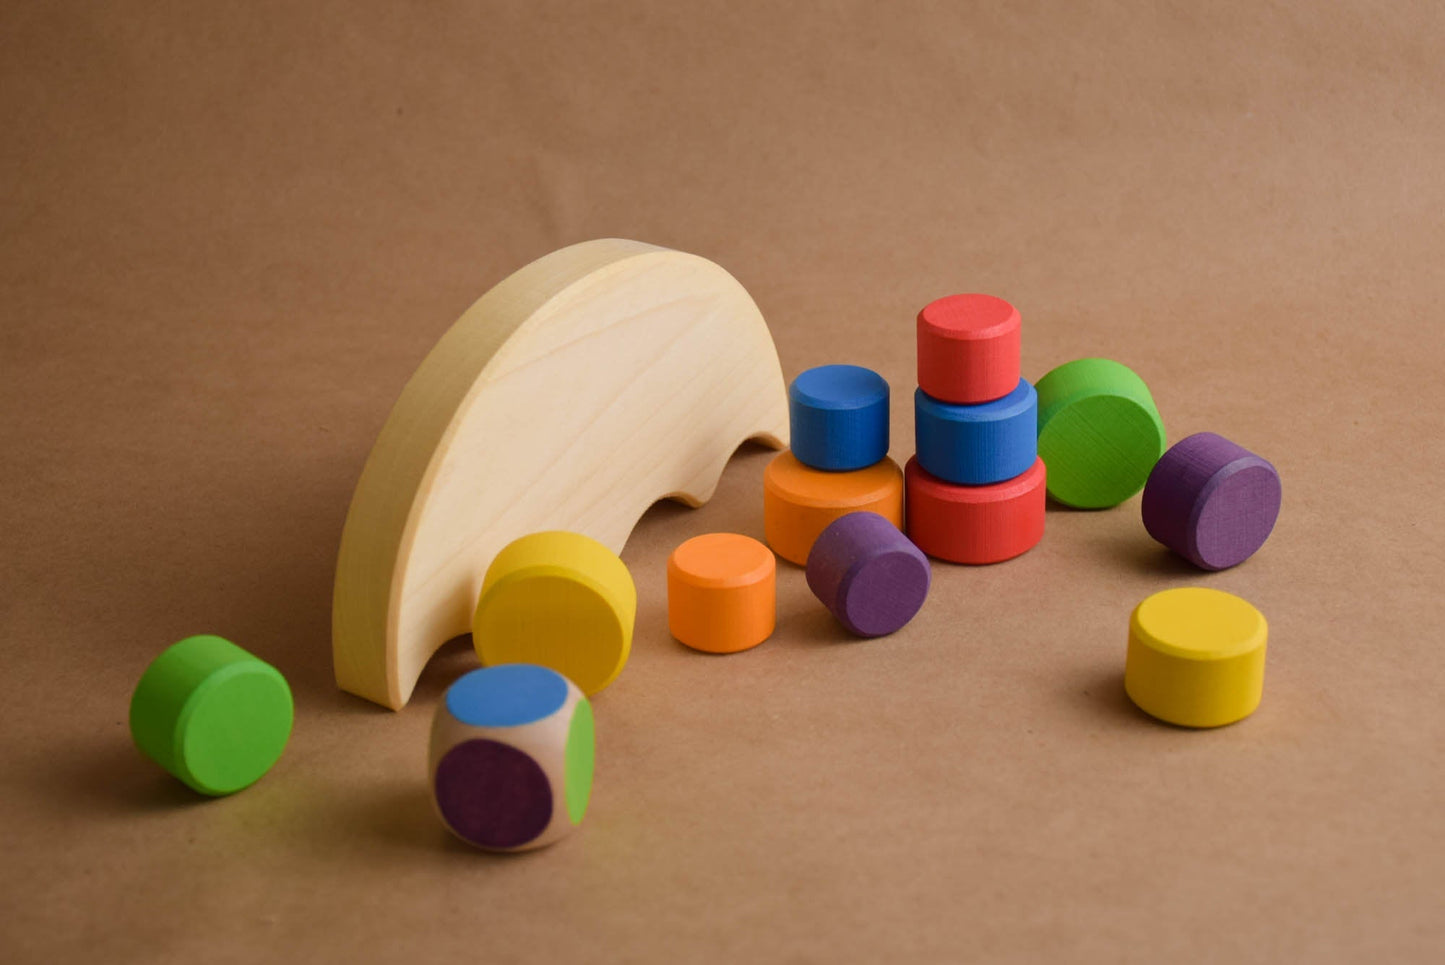 Wooden Stacking Toy, Party Games, Kids Learning Toys, Child Development, Educational Toy, Montessori Baby Toys, Waldorf Toys for Toddlers